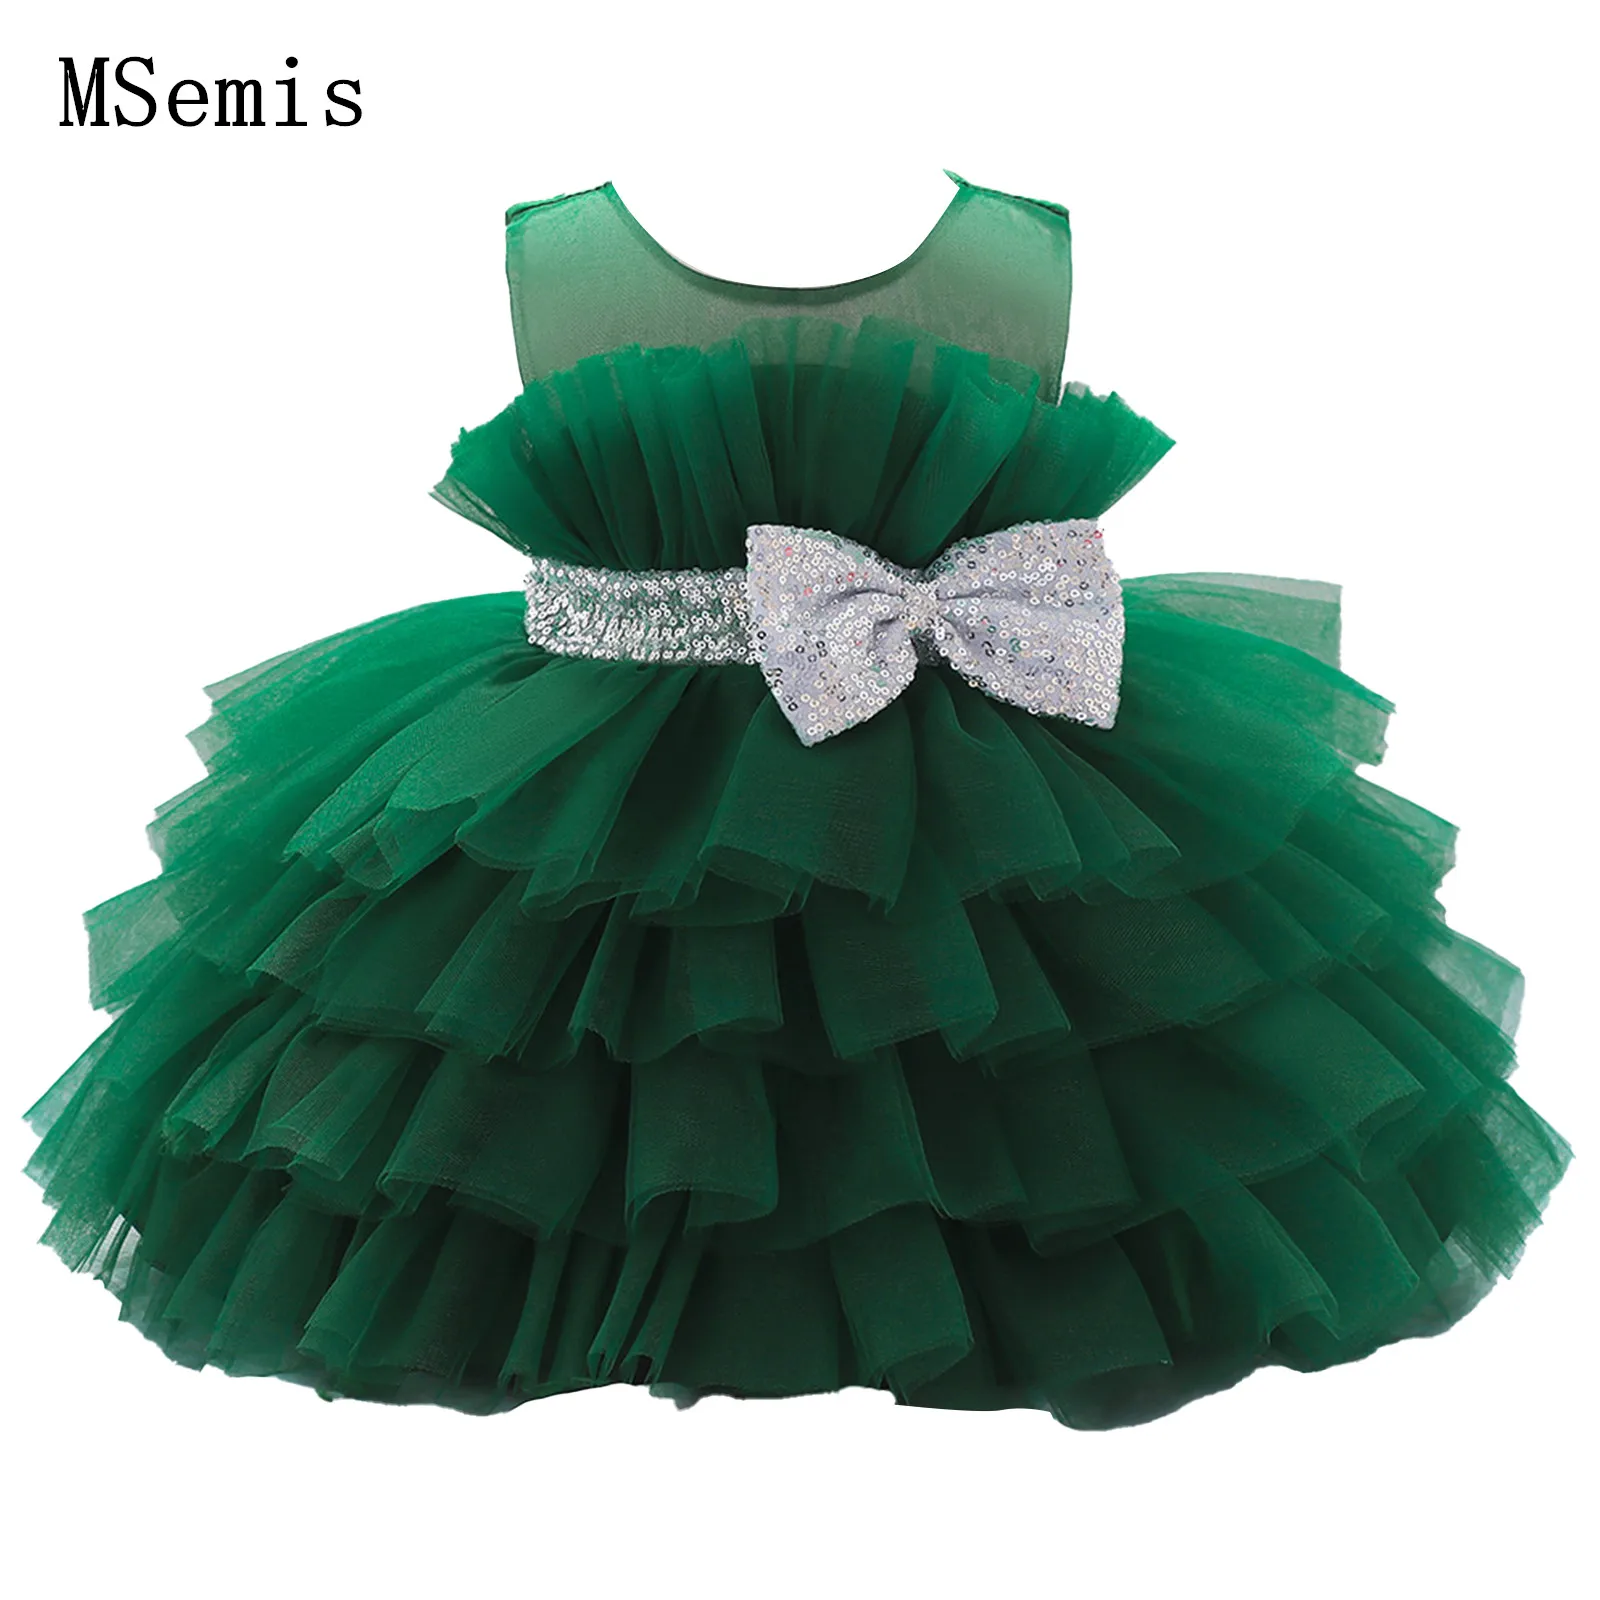 

Toddler Baby Girls Princess Dress Sleeveless Sequin Waistband Big Bowknot Four-tiered Ruffle Ball Gown Pageant Party Tutu Dress